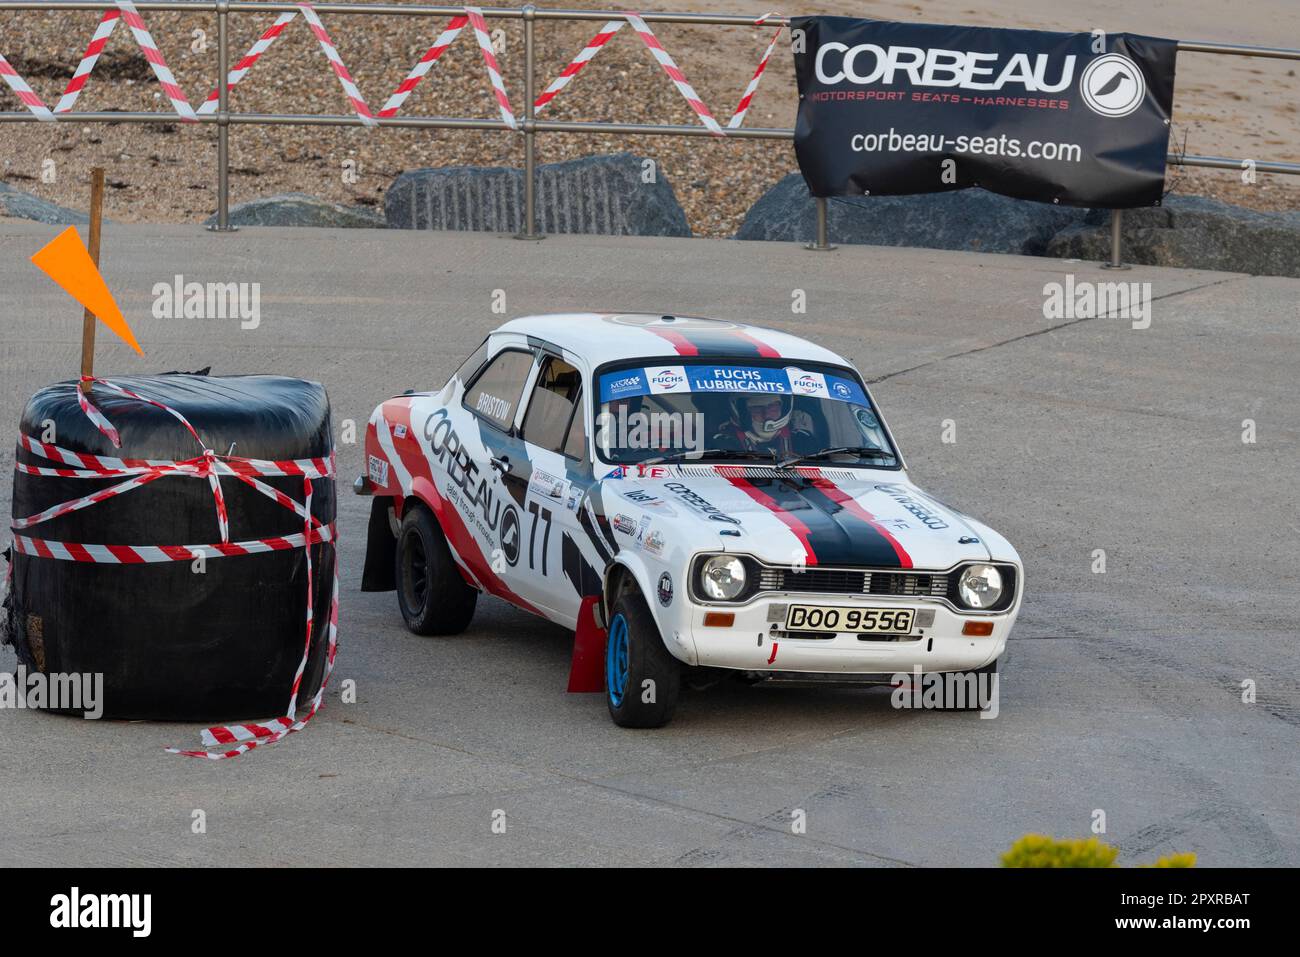 Vince Bristow racing a classic 1969 Ford Escort Mk1 Mexico competing in the Corbeau Seats rally on the seafront at Clacton, Essex, UK Stock Photo